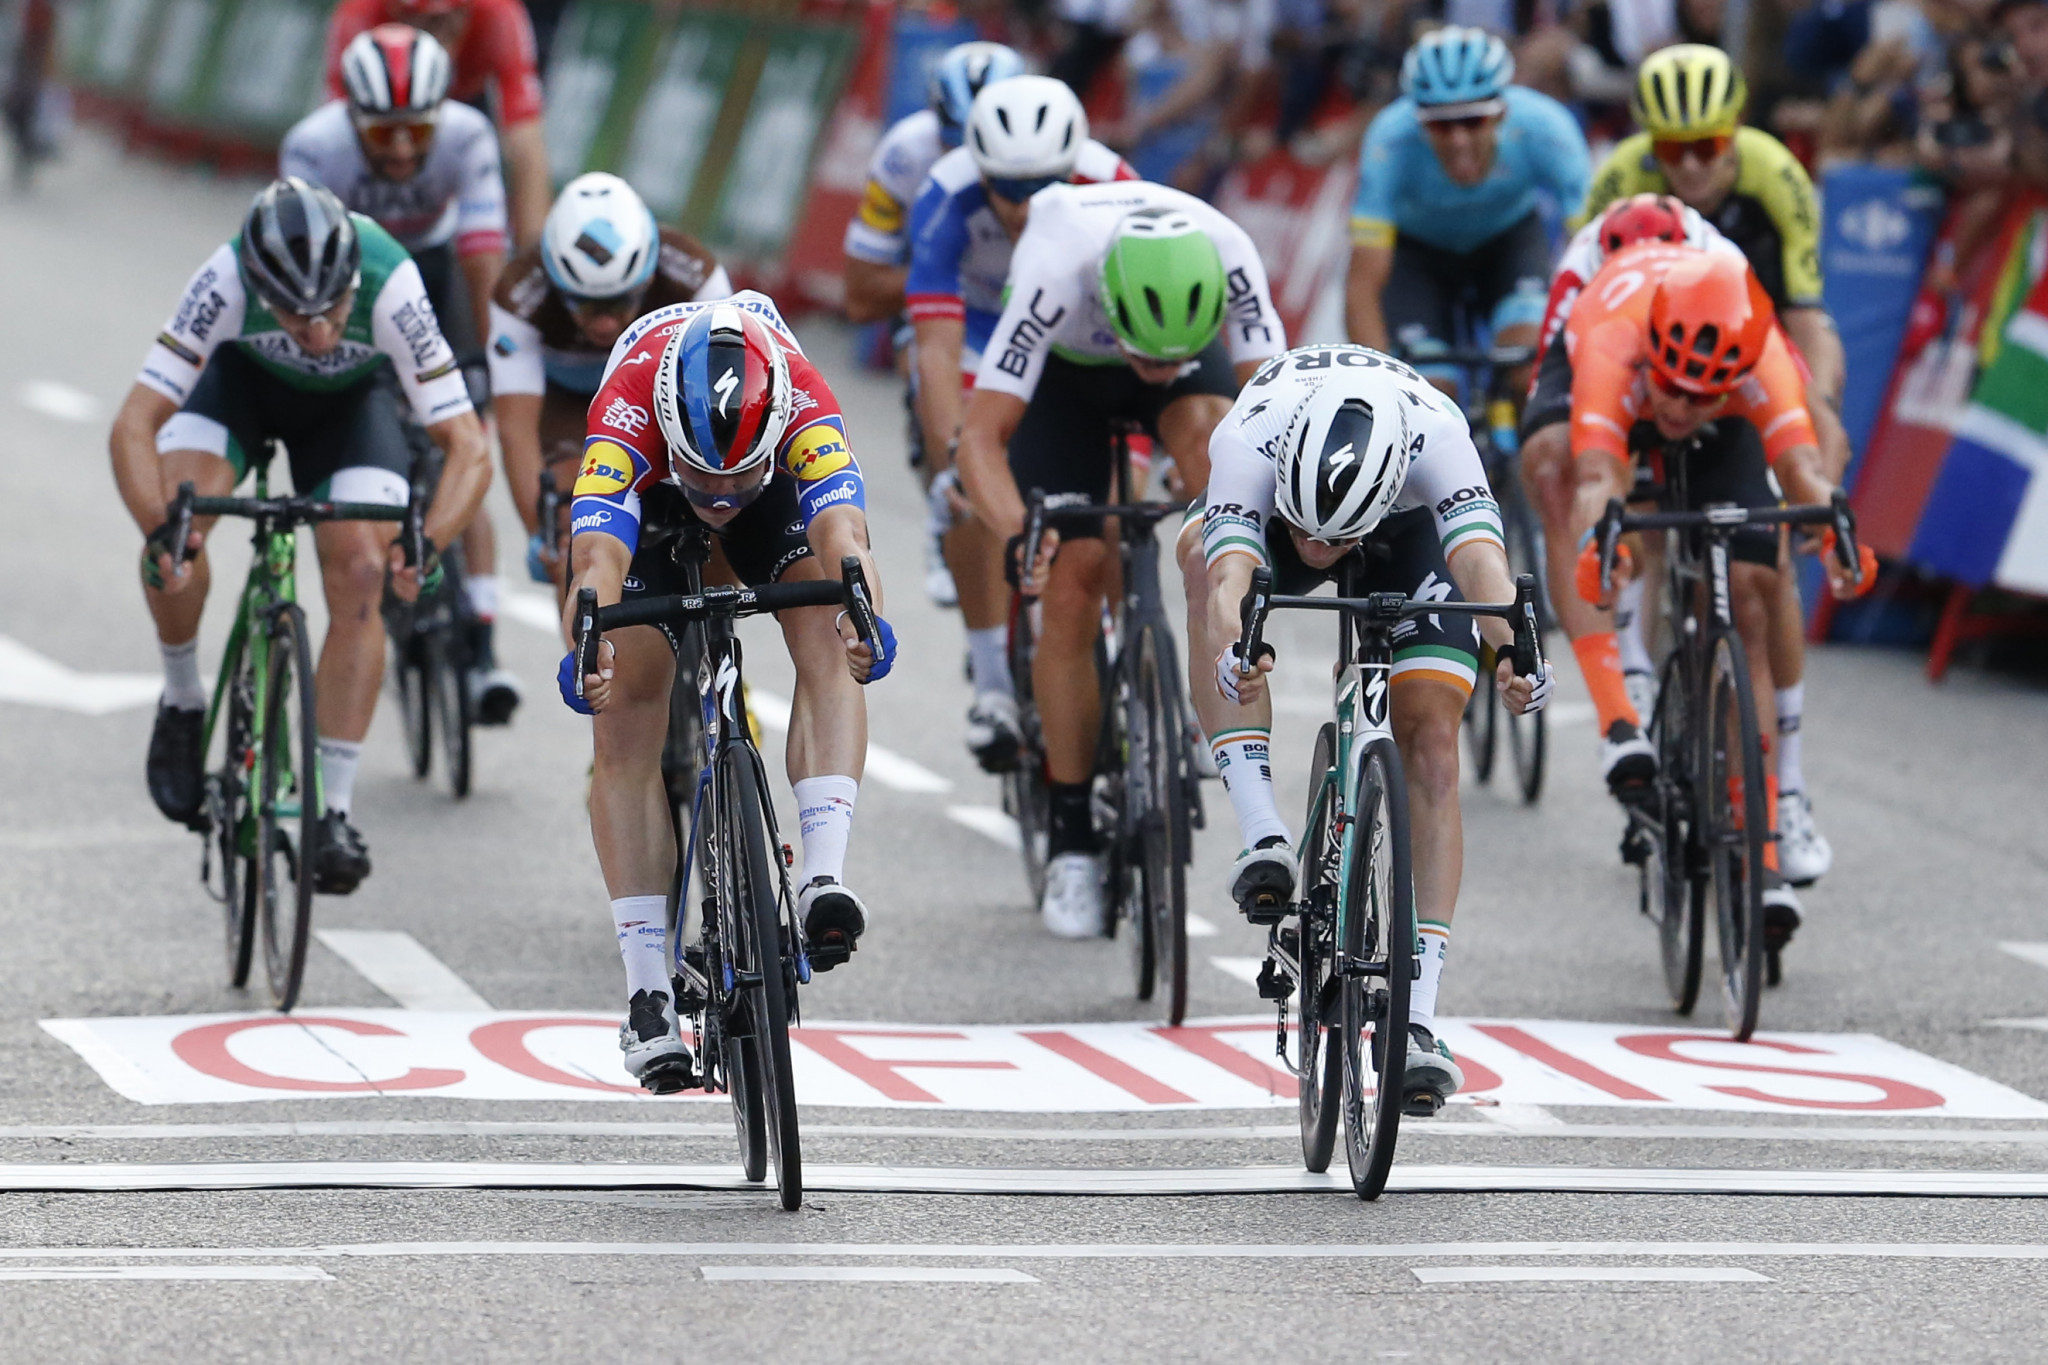 The Vuelta a España will conclude in Madrid ©Getty Images